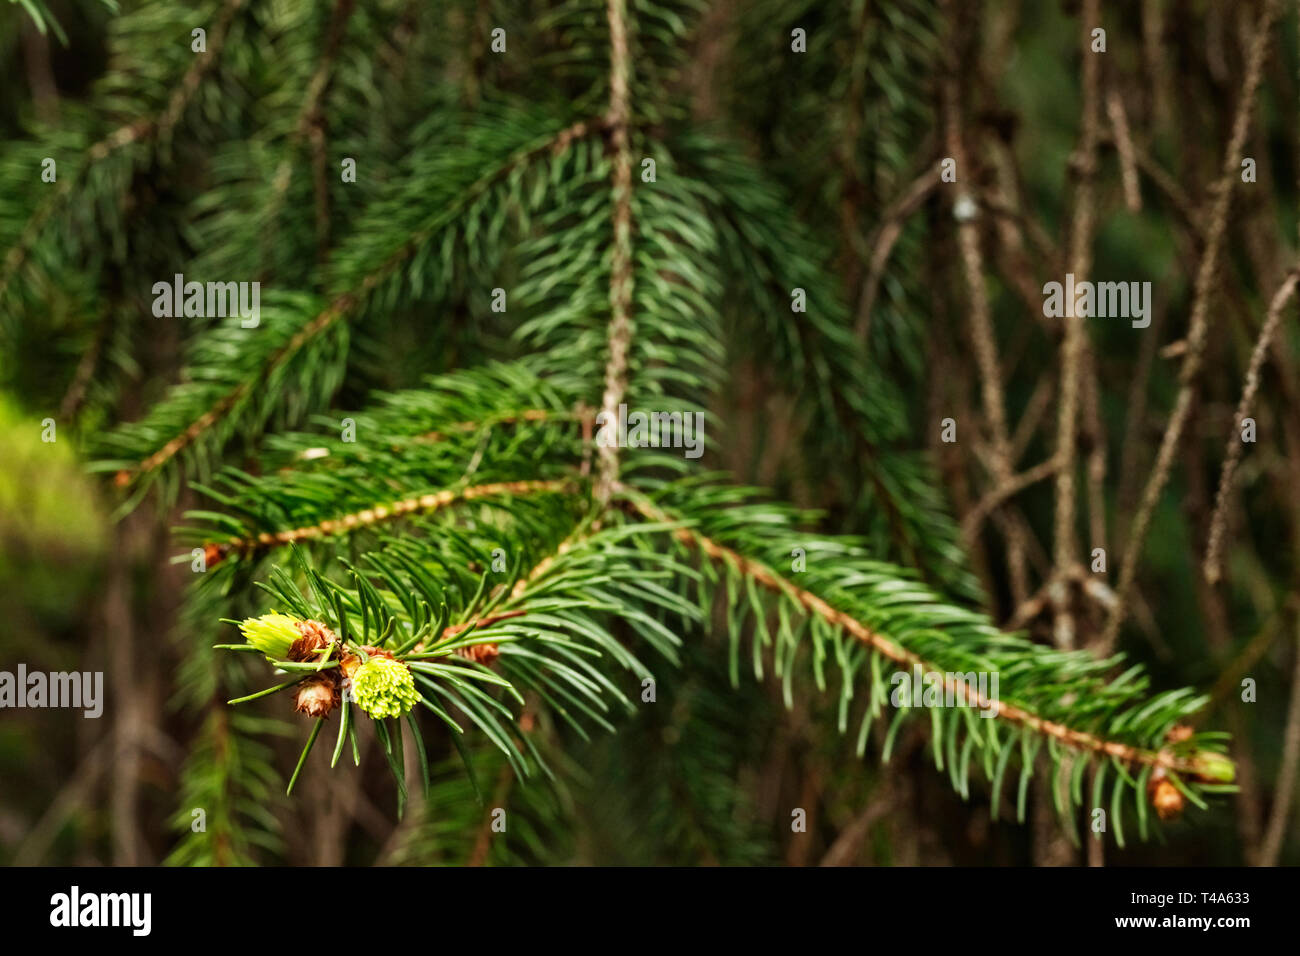 Beautiful branch of spruce -picea abies or norway spruce - with  young green sprout and cone Stock Photo